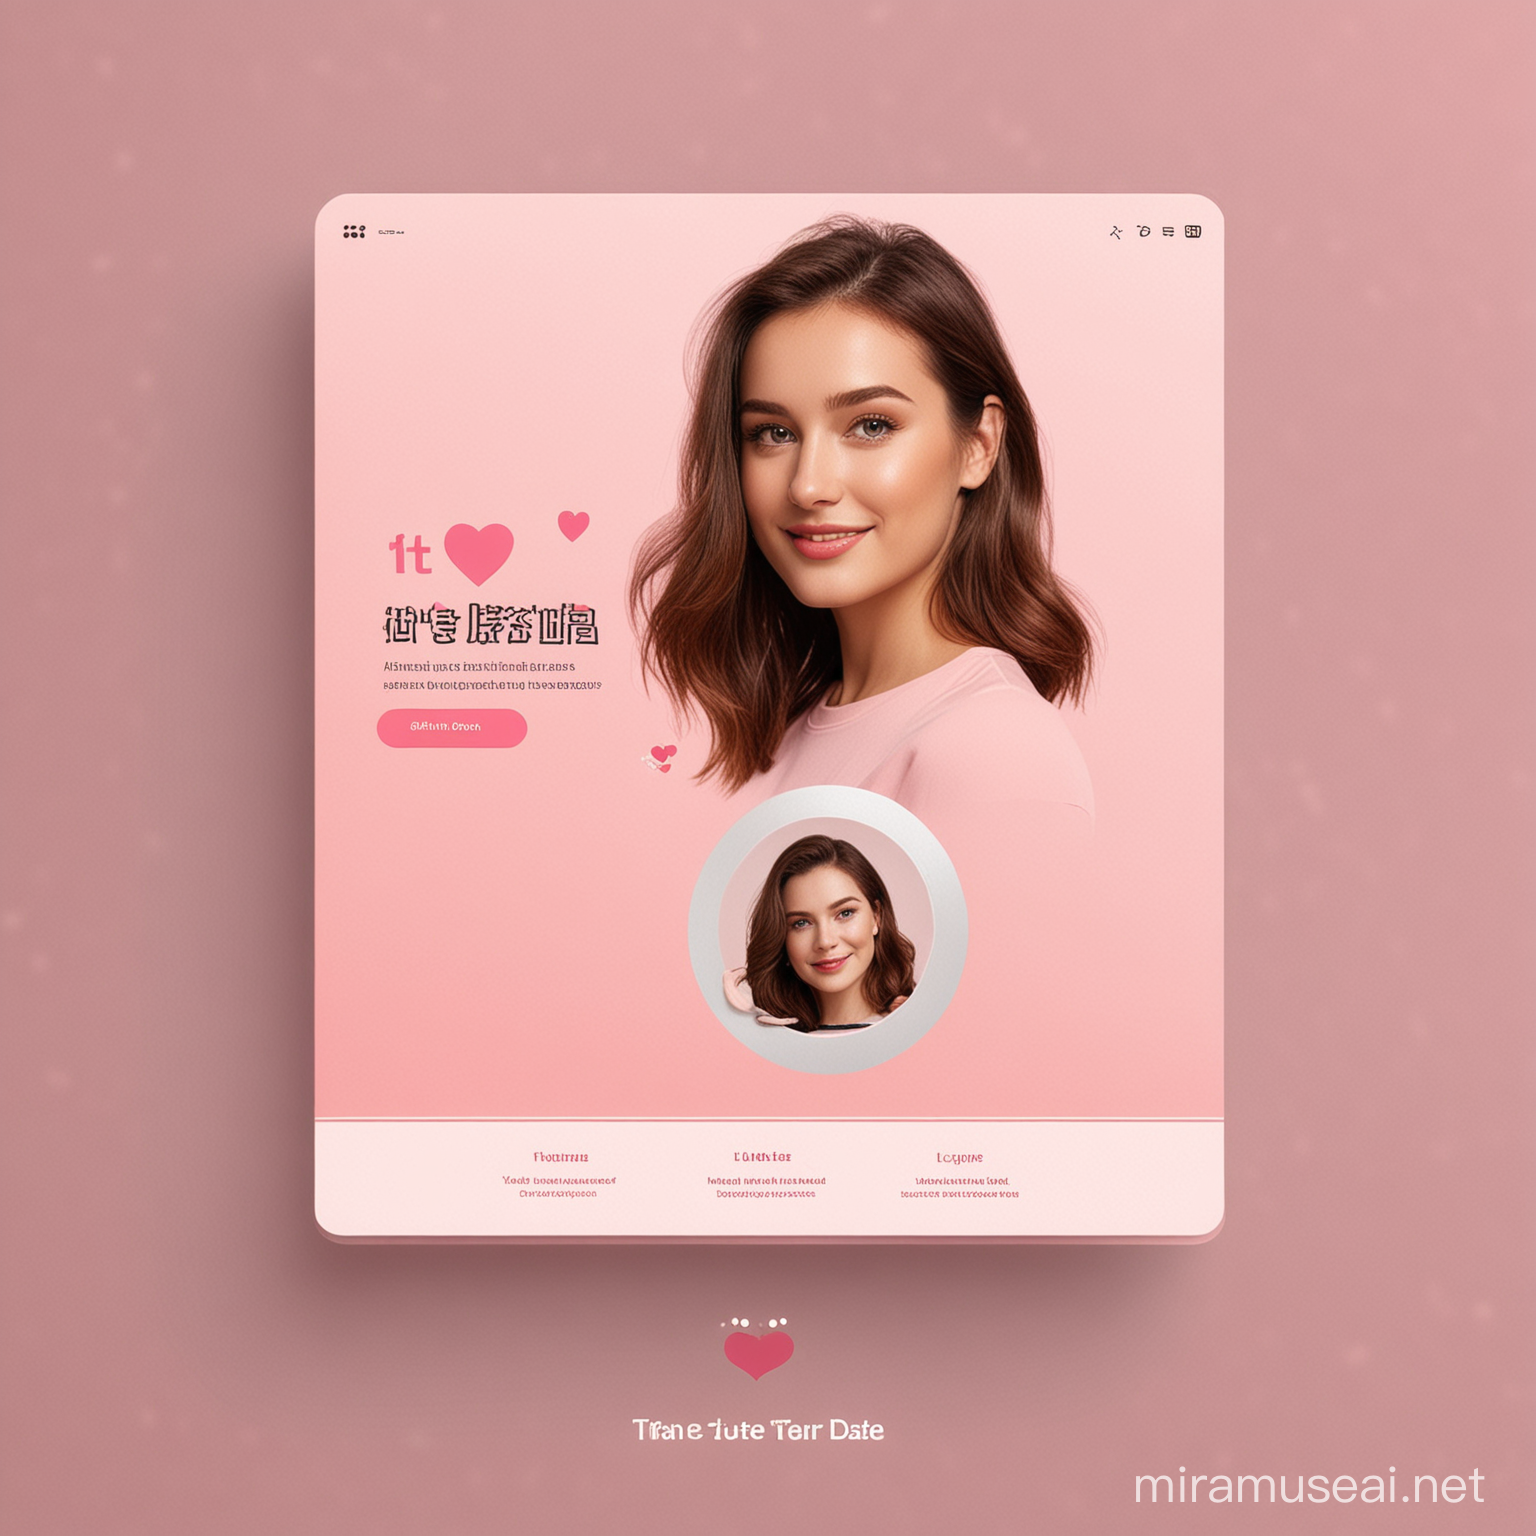 ai dating site template sample background
